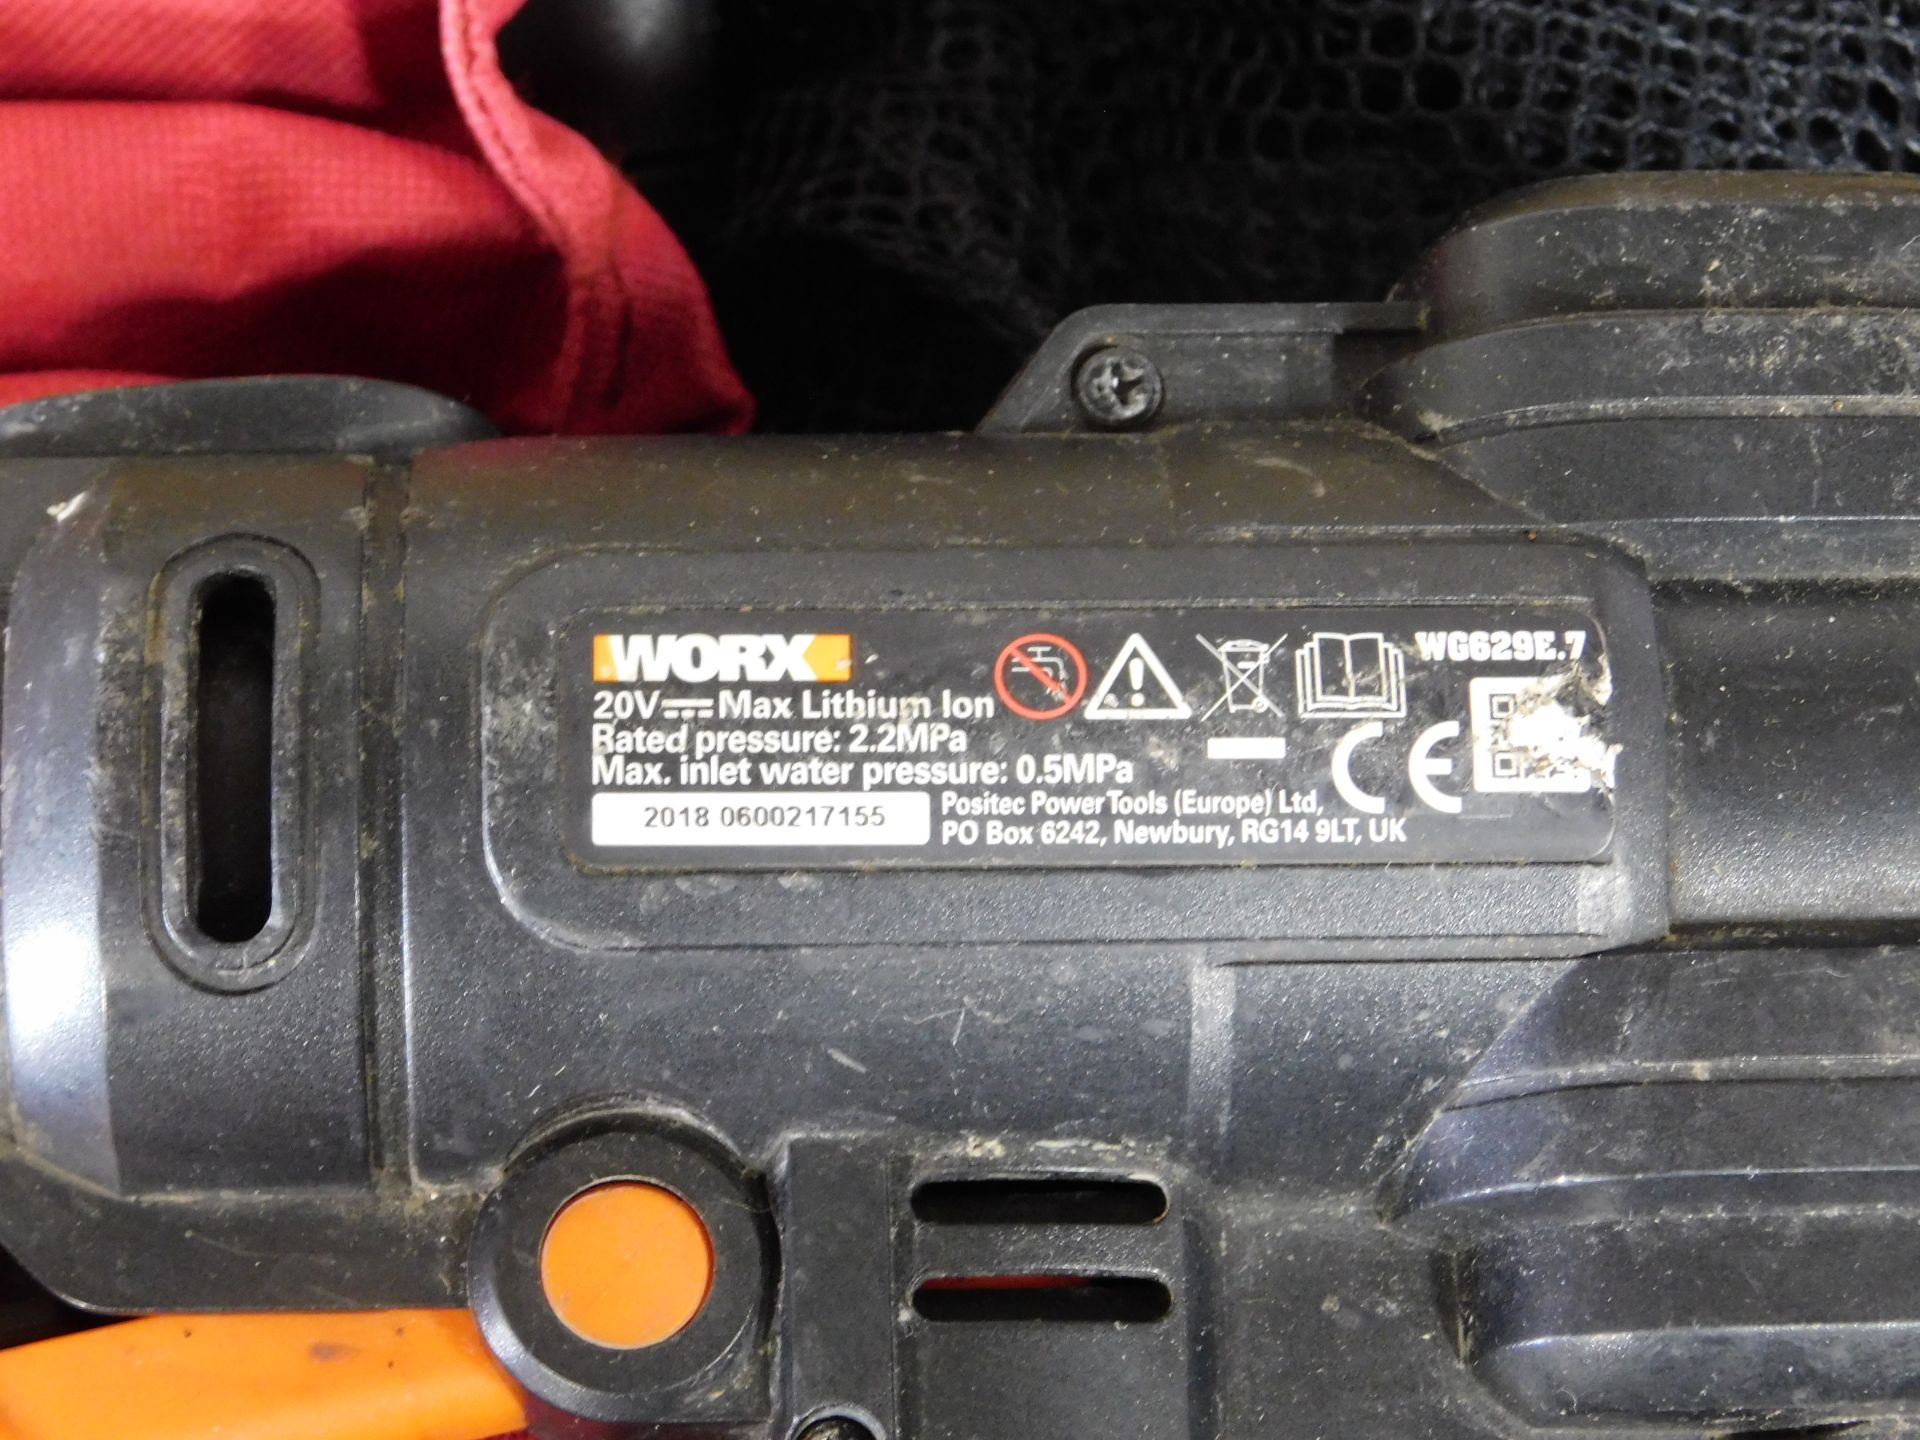 Worx W6629E.7 Pressure Cleaner (Location Brentwood. Please Refer to General Notes) - Image 3 of 3